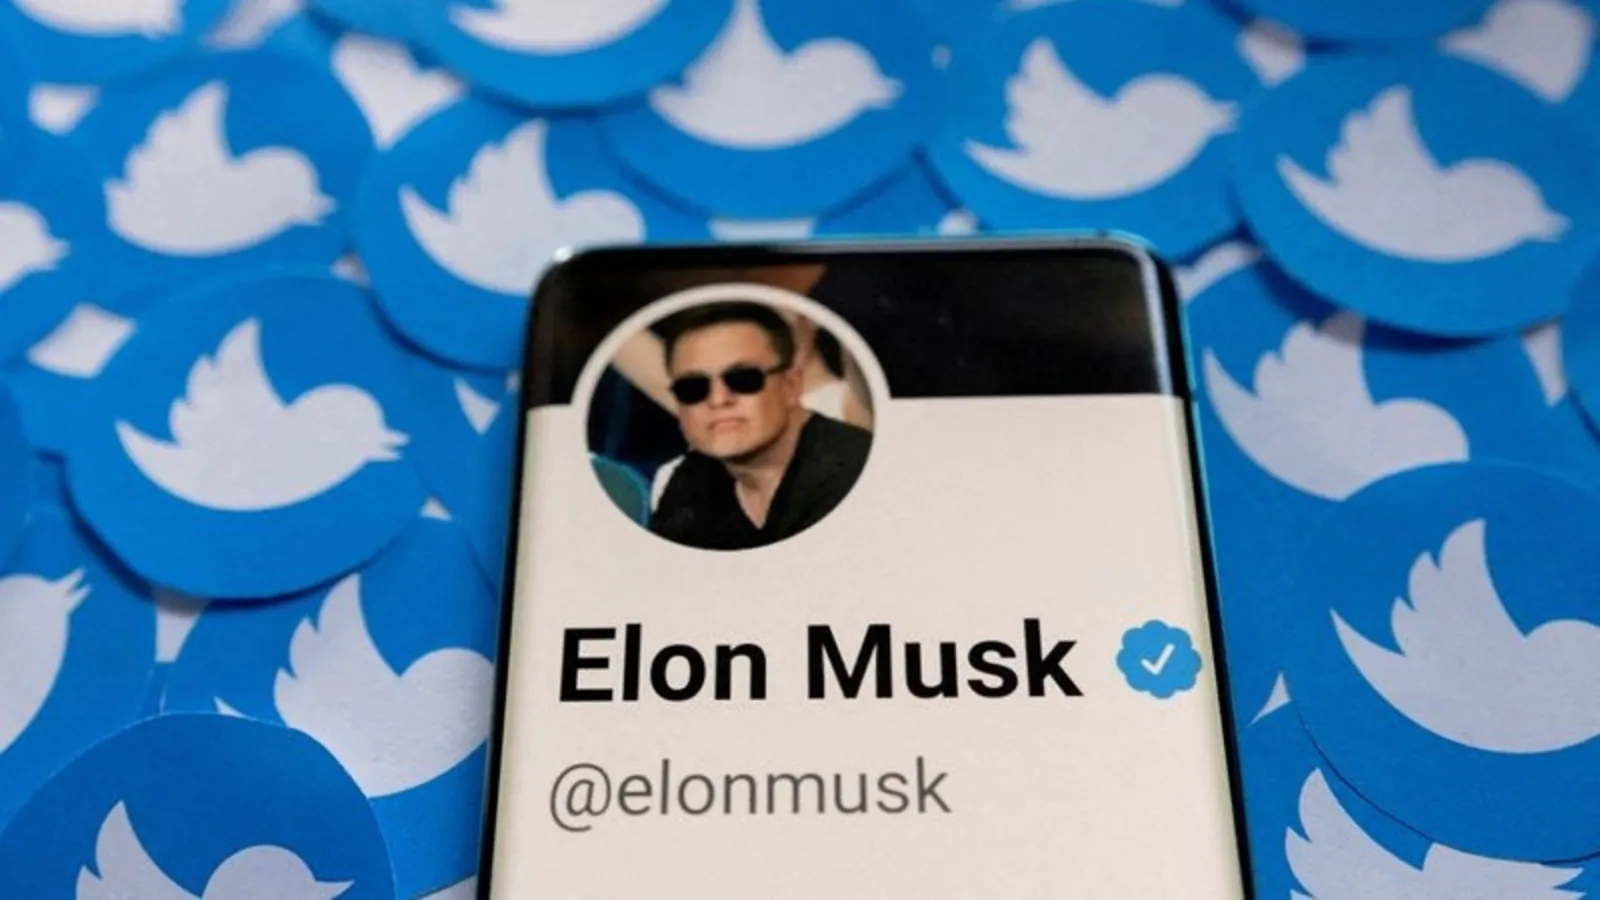 Twitter shares slump after Elon Musk says takeover on hold